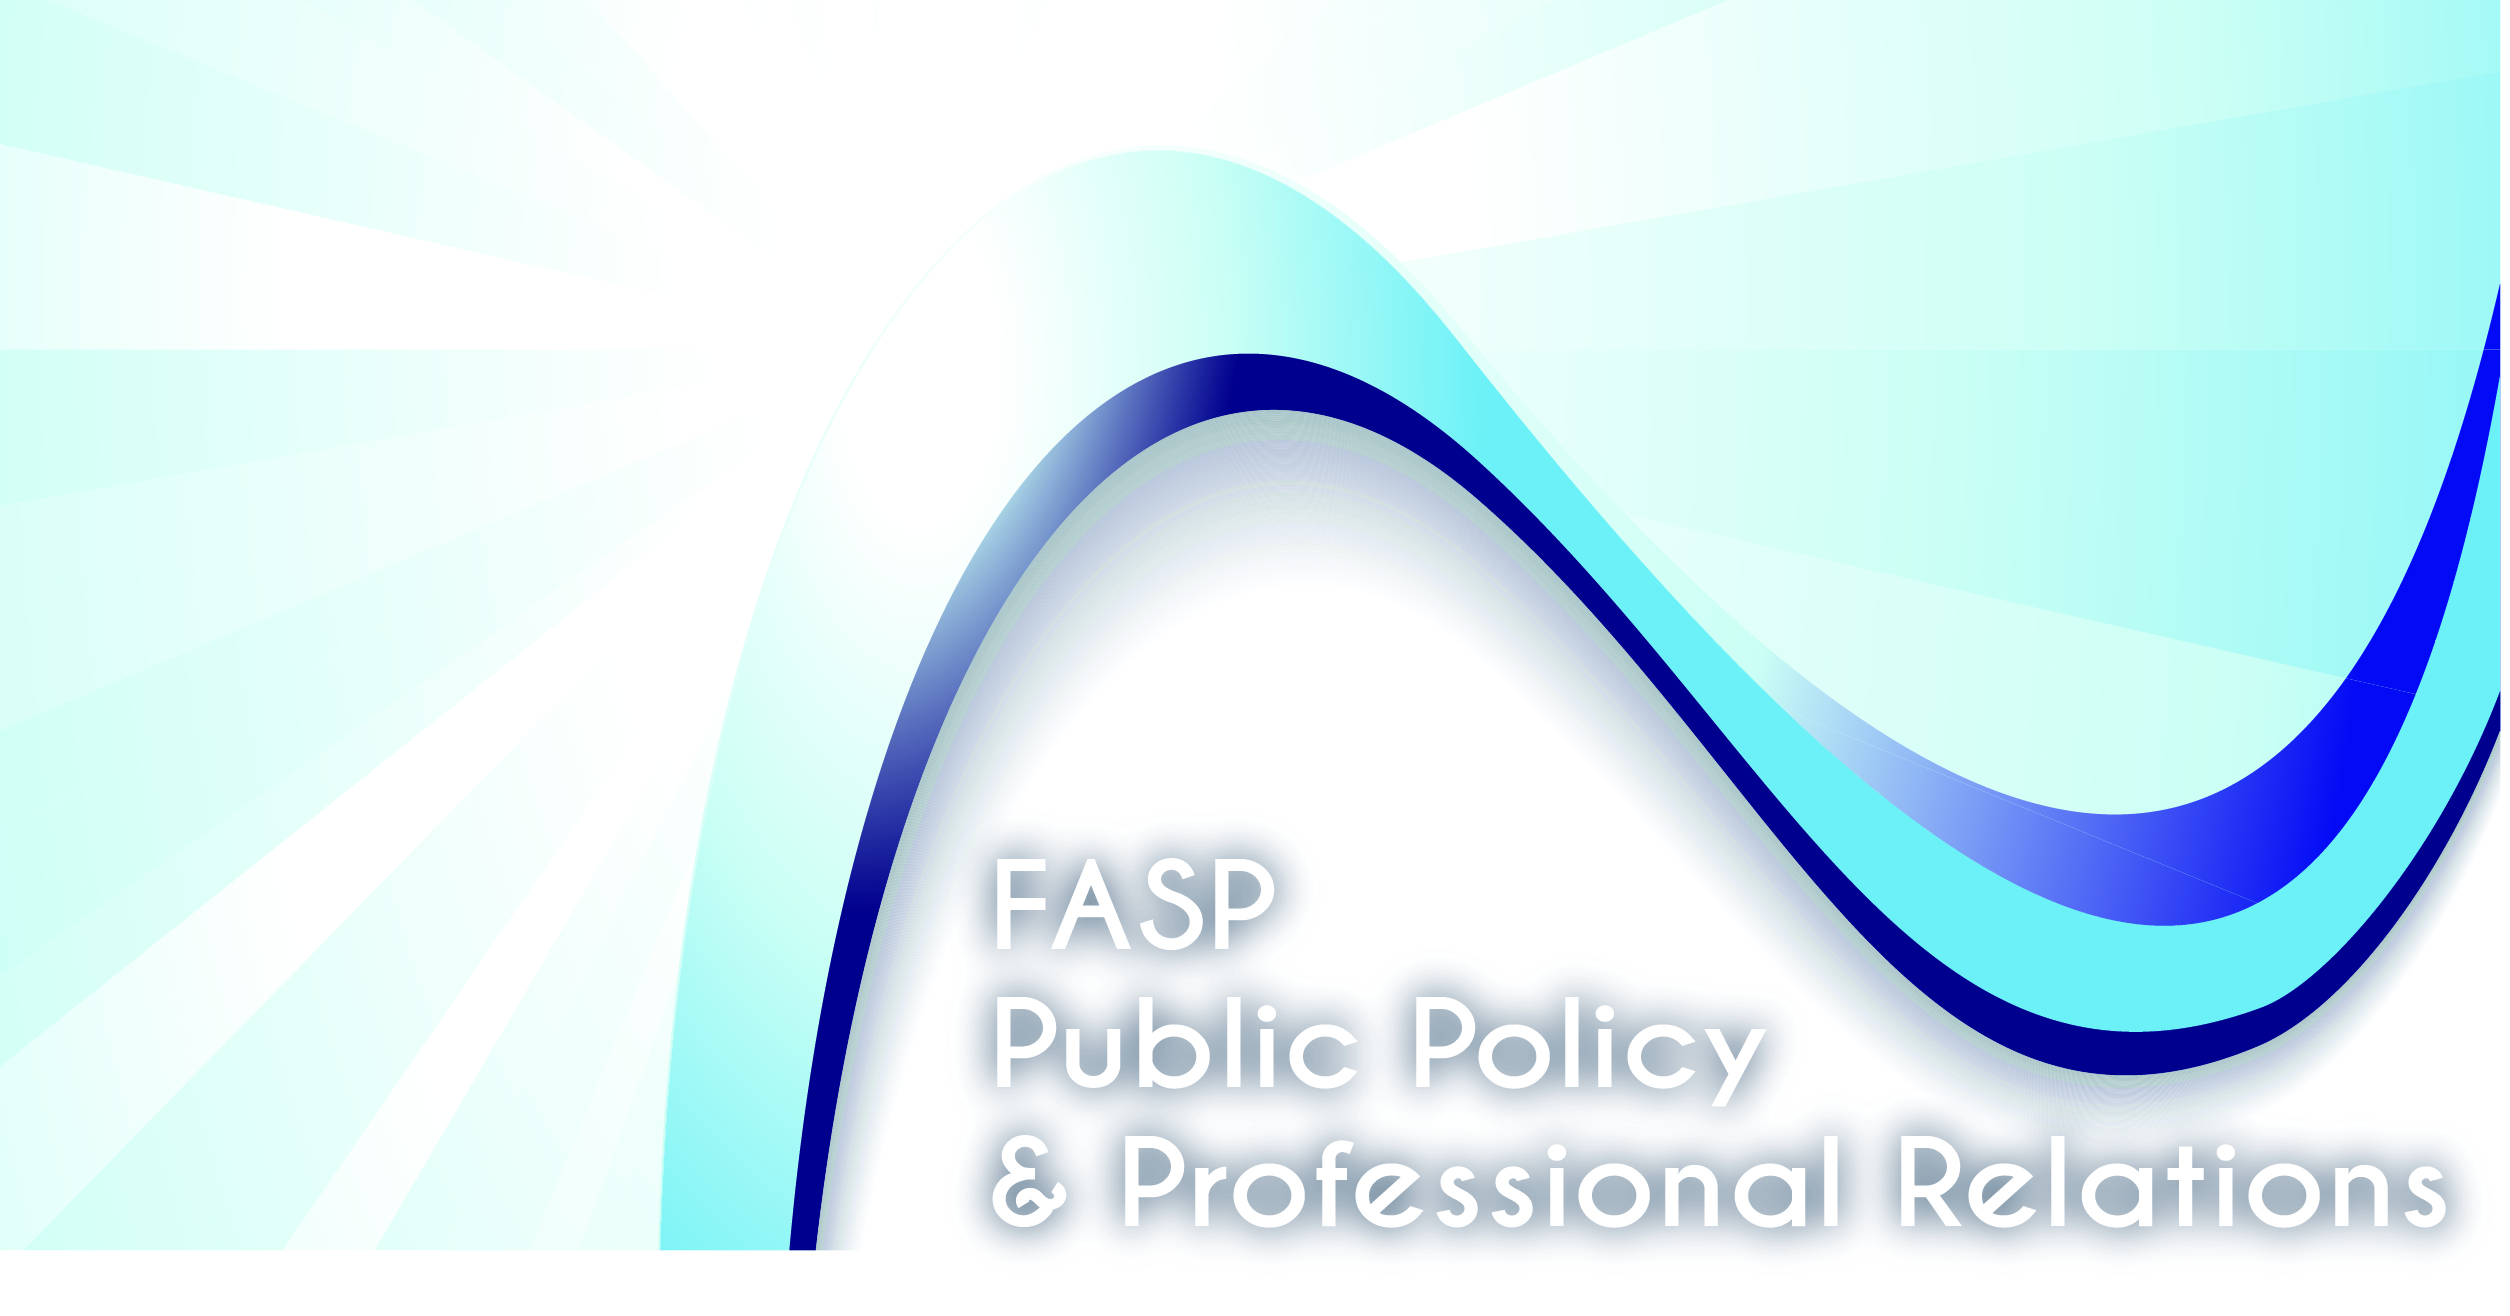 FASP Public Policy & Professional Relations